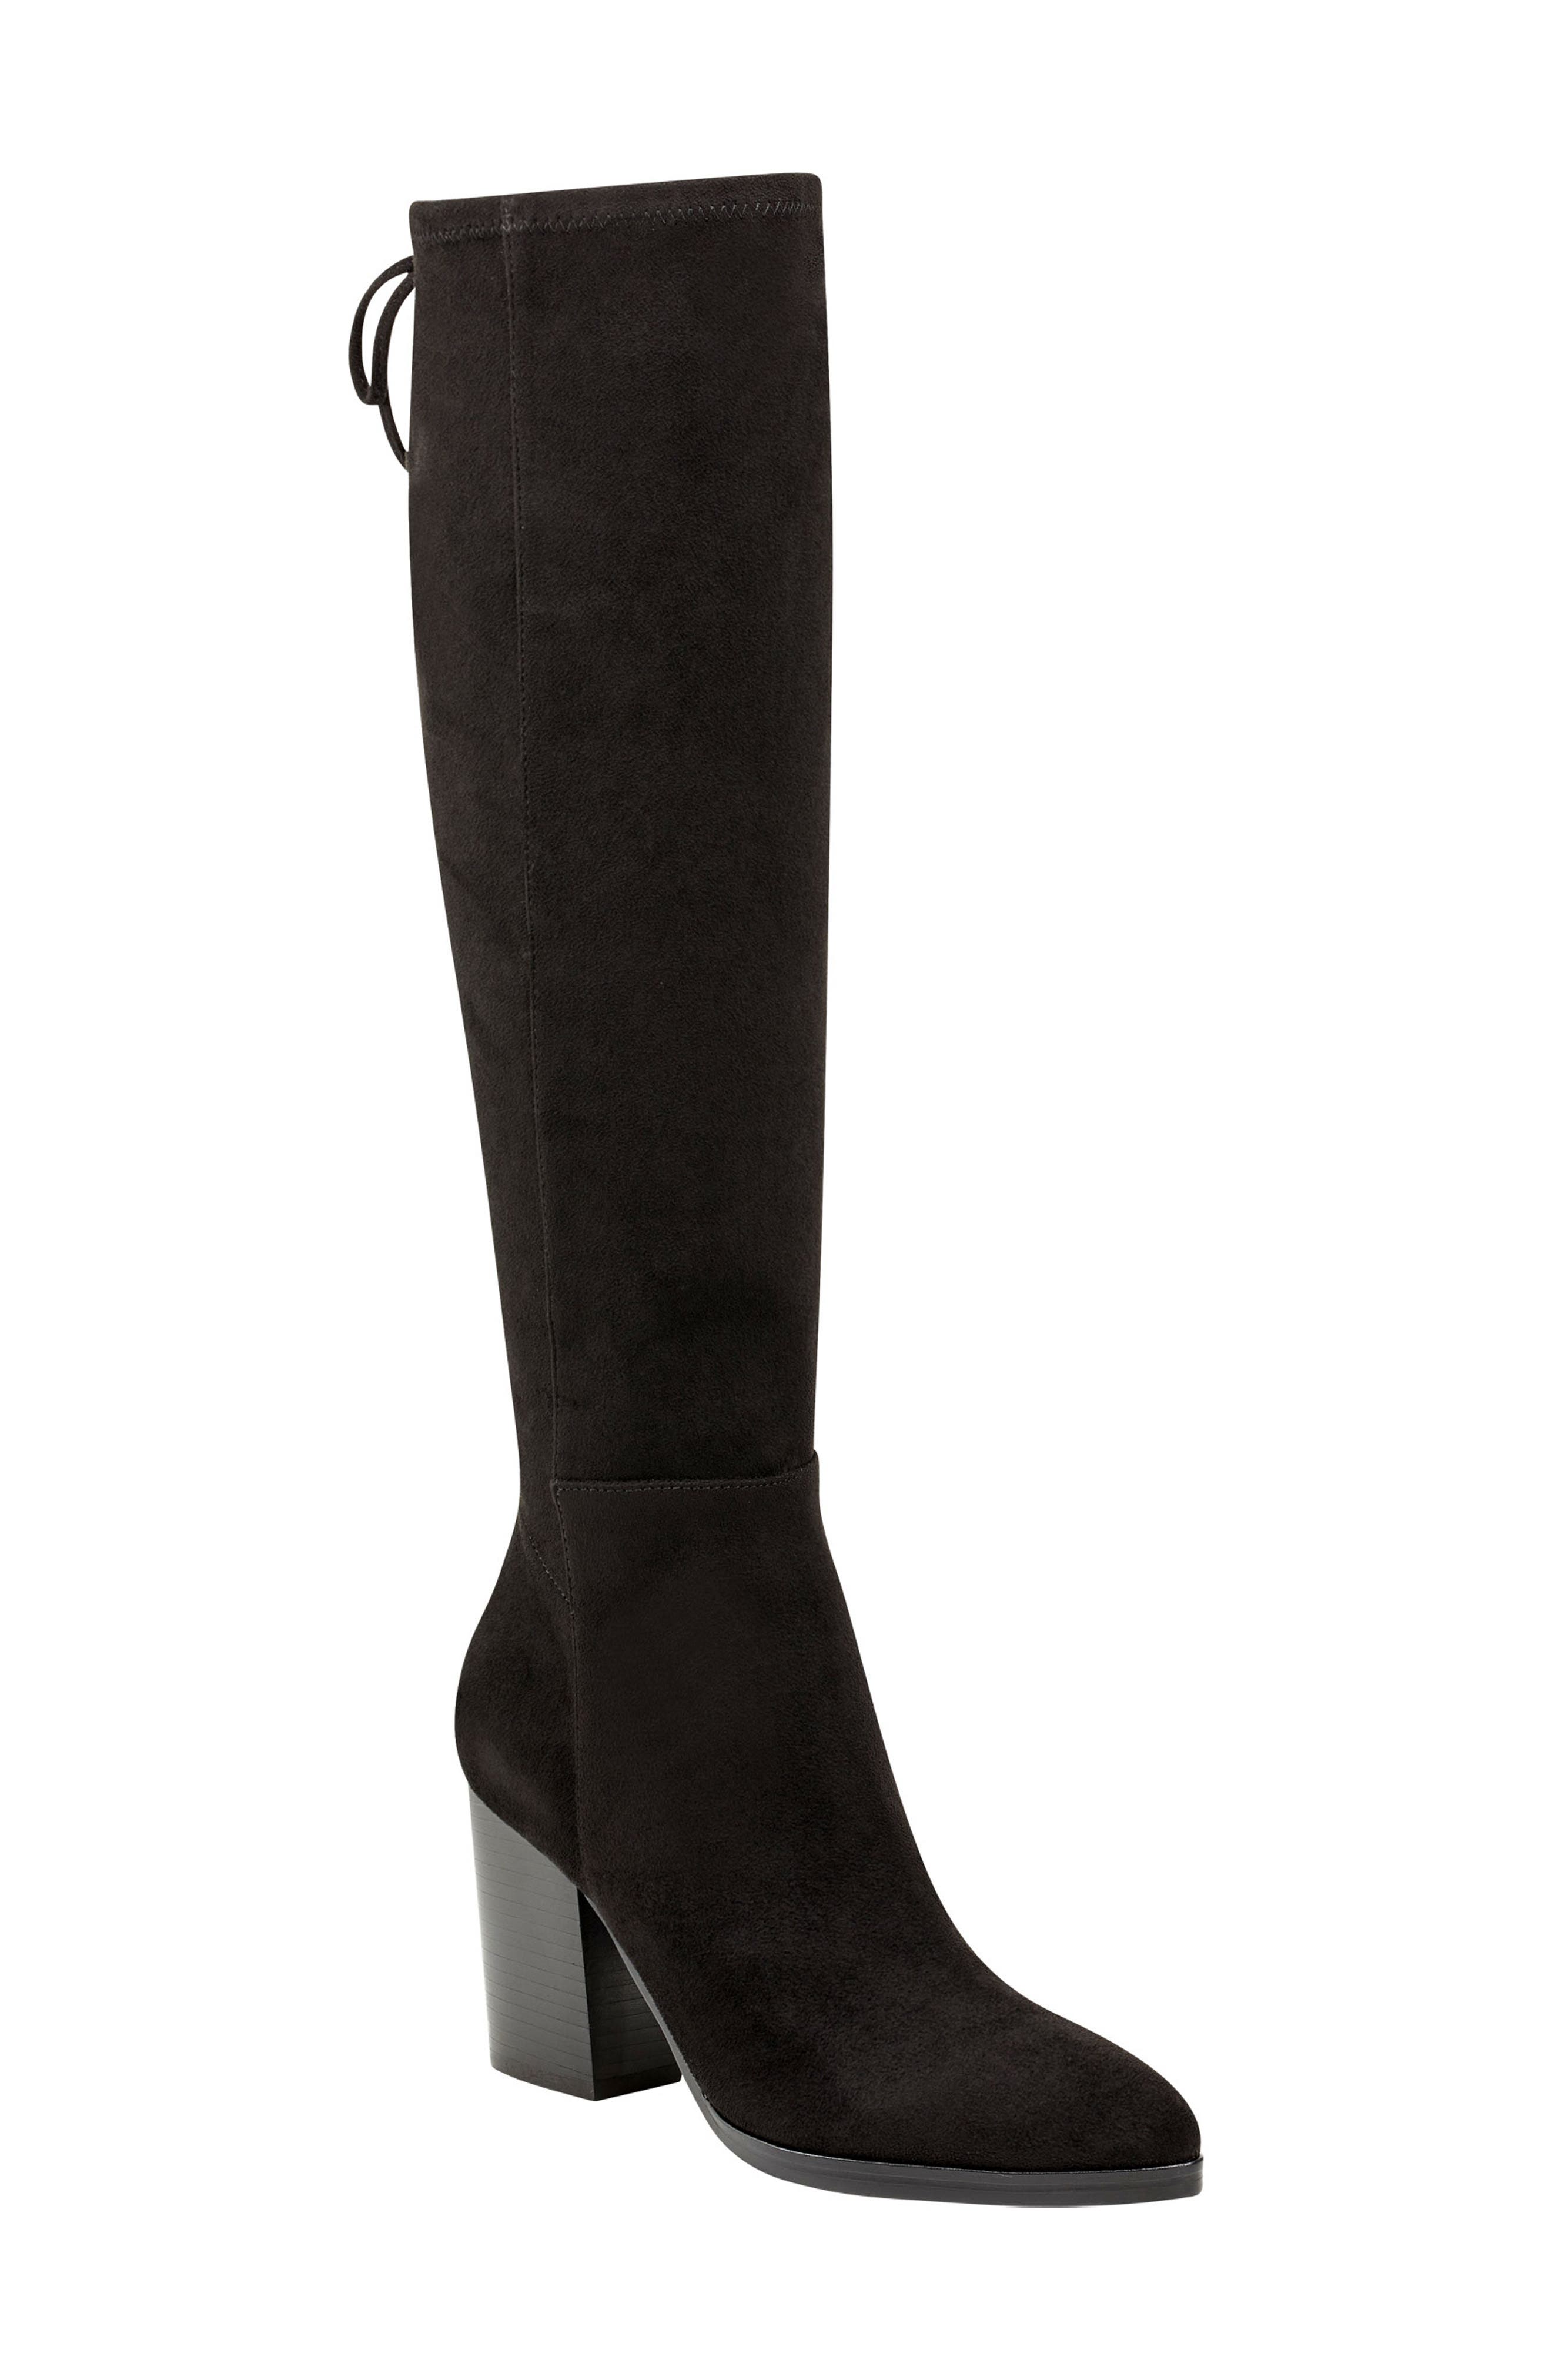 marc fisher knee high suede boots